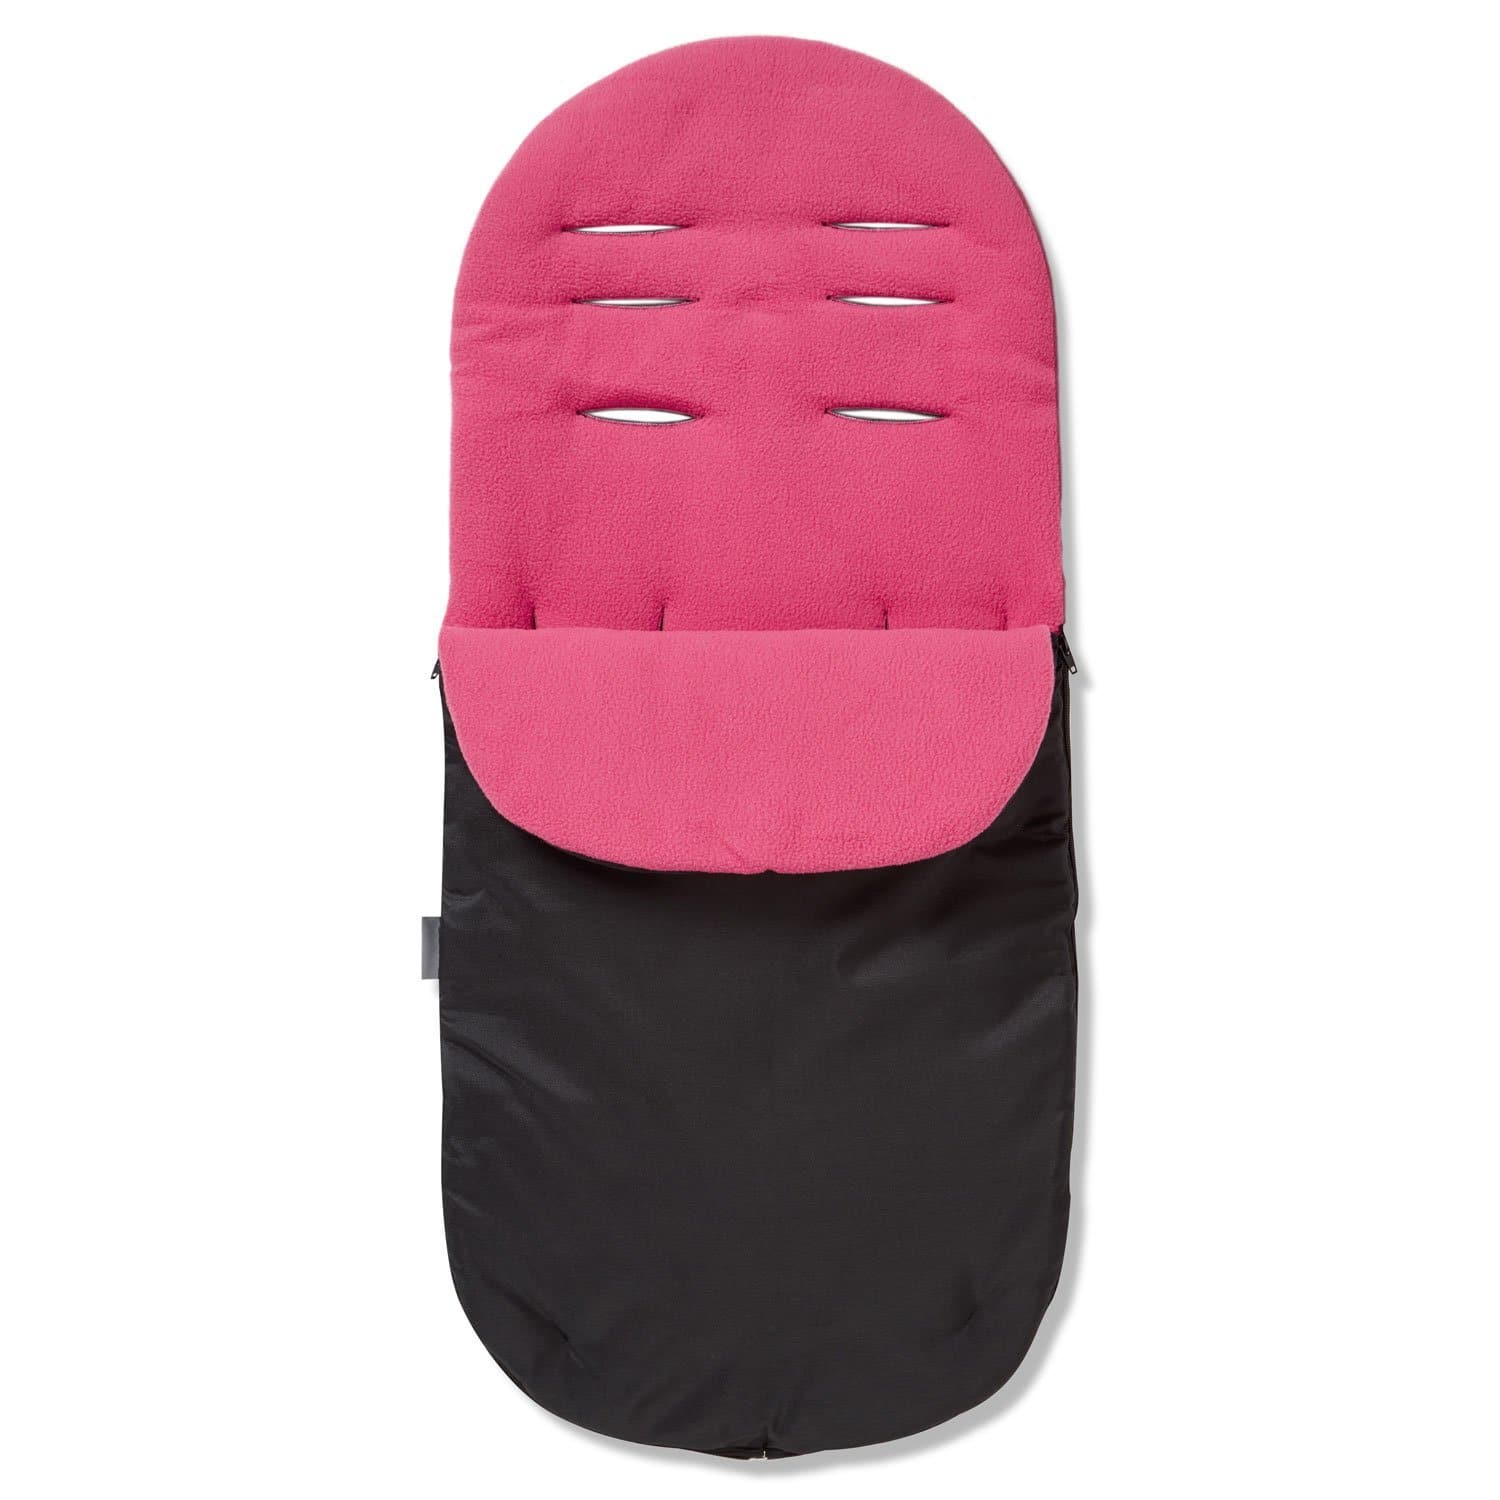 Footmuff / Cosy Toes Compatible with Venicci - Dark Pink / Fits All Models | For Your Little One